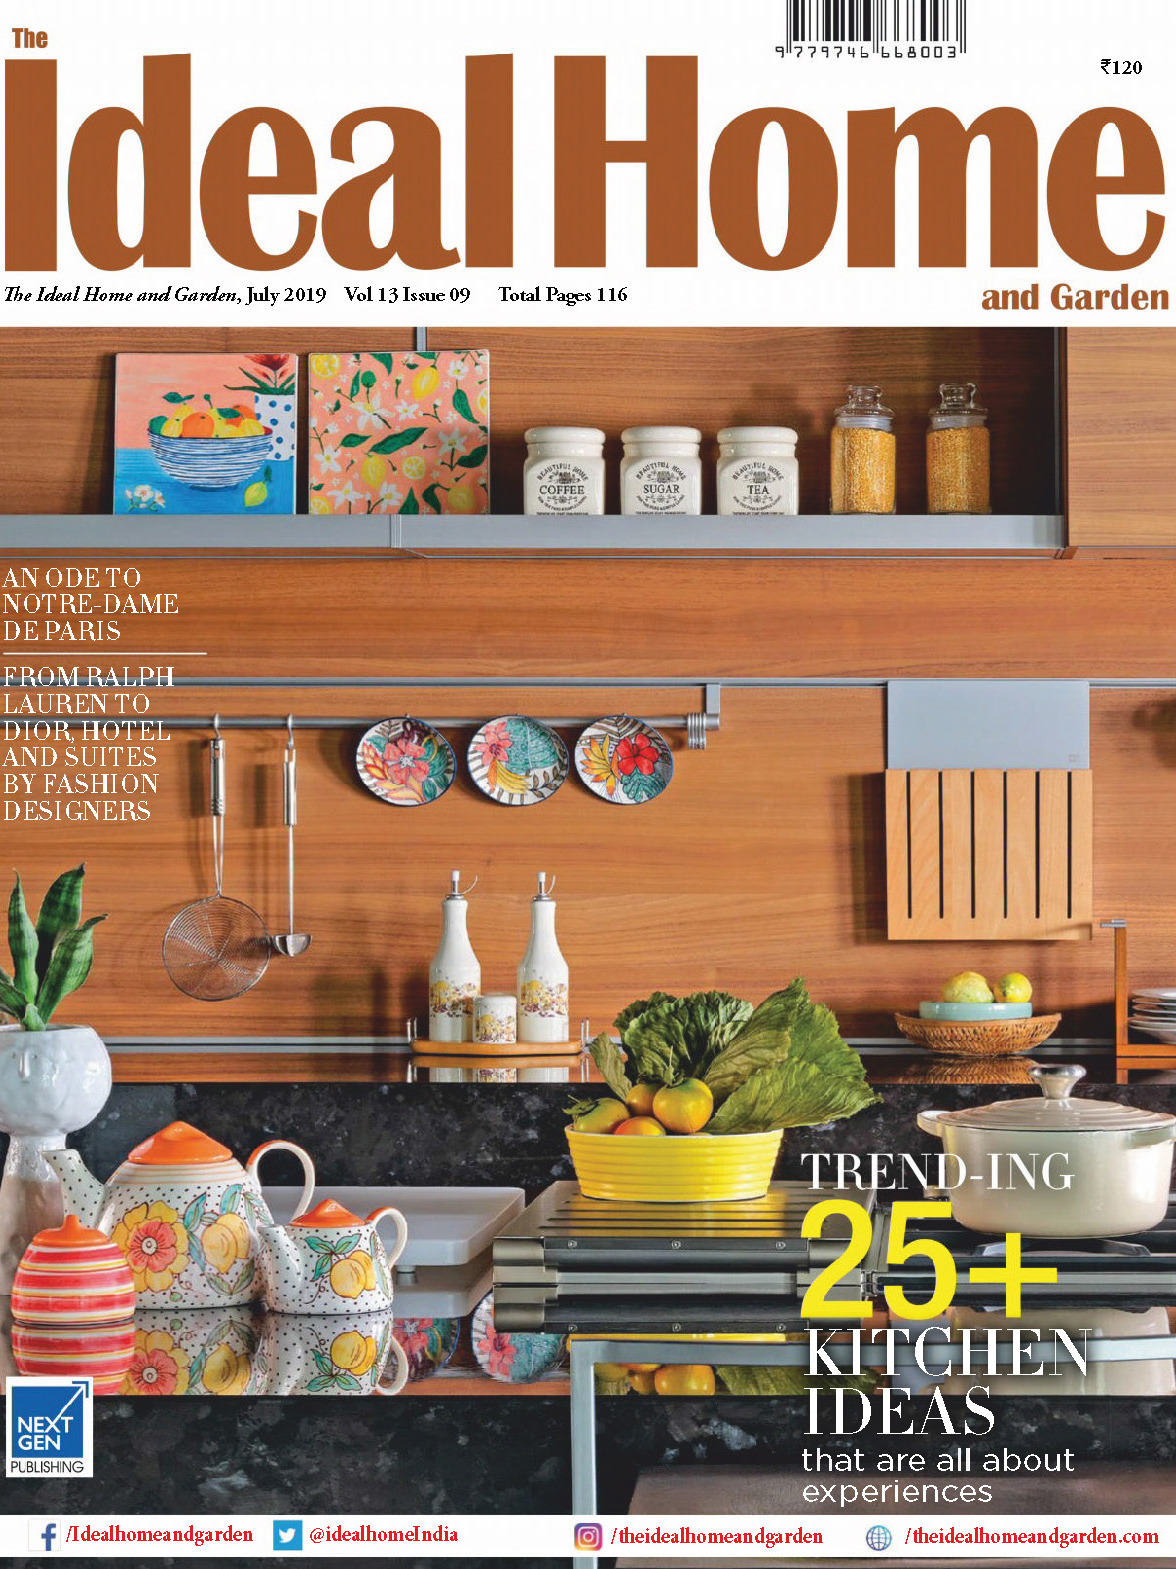 《The Ideal Home and Garden》印度版理想的家园杂志2019年07月号